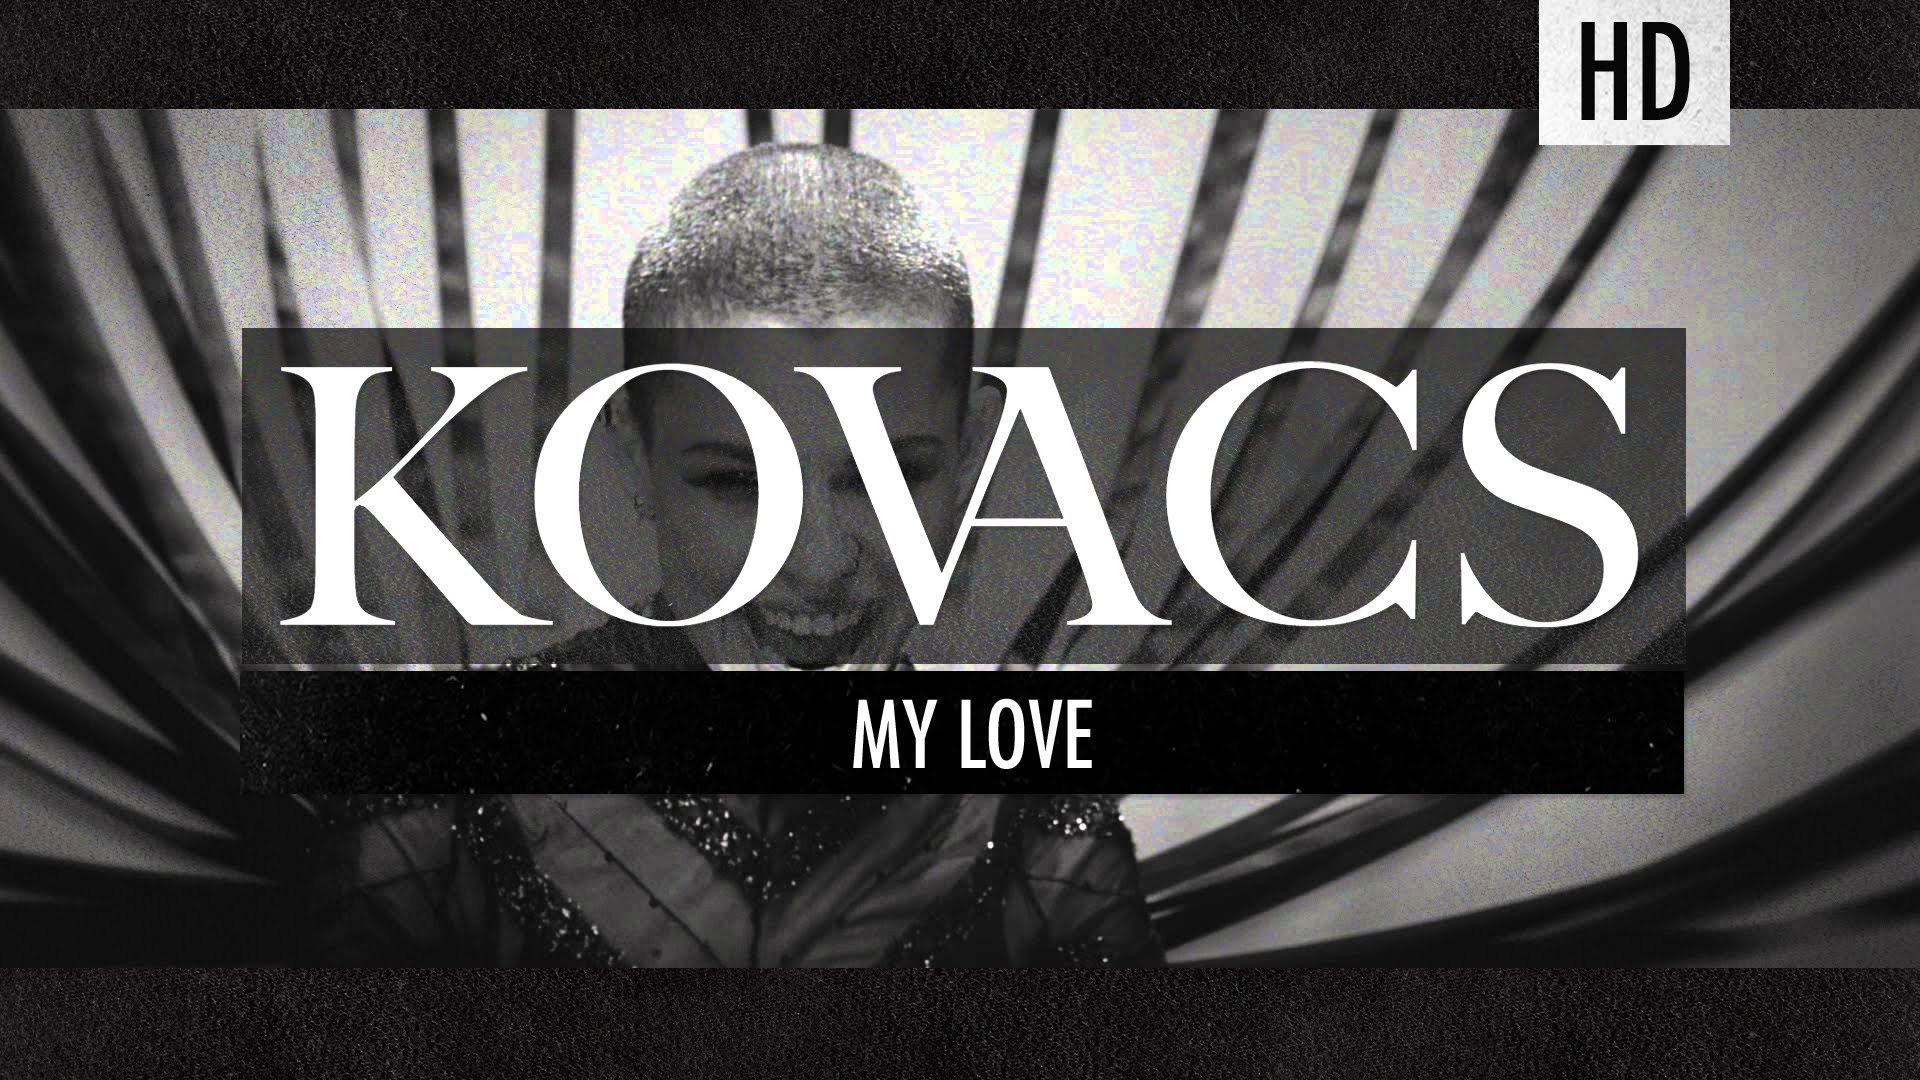 Kovacs - My Love (Official Video) - YouTube